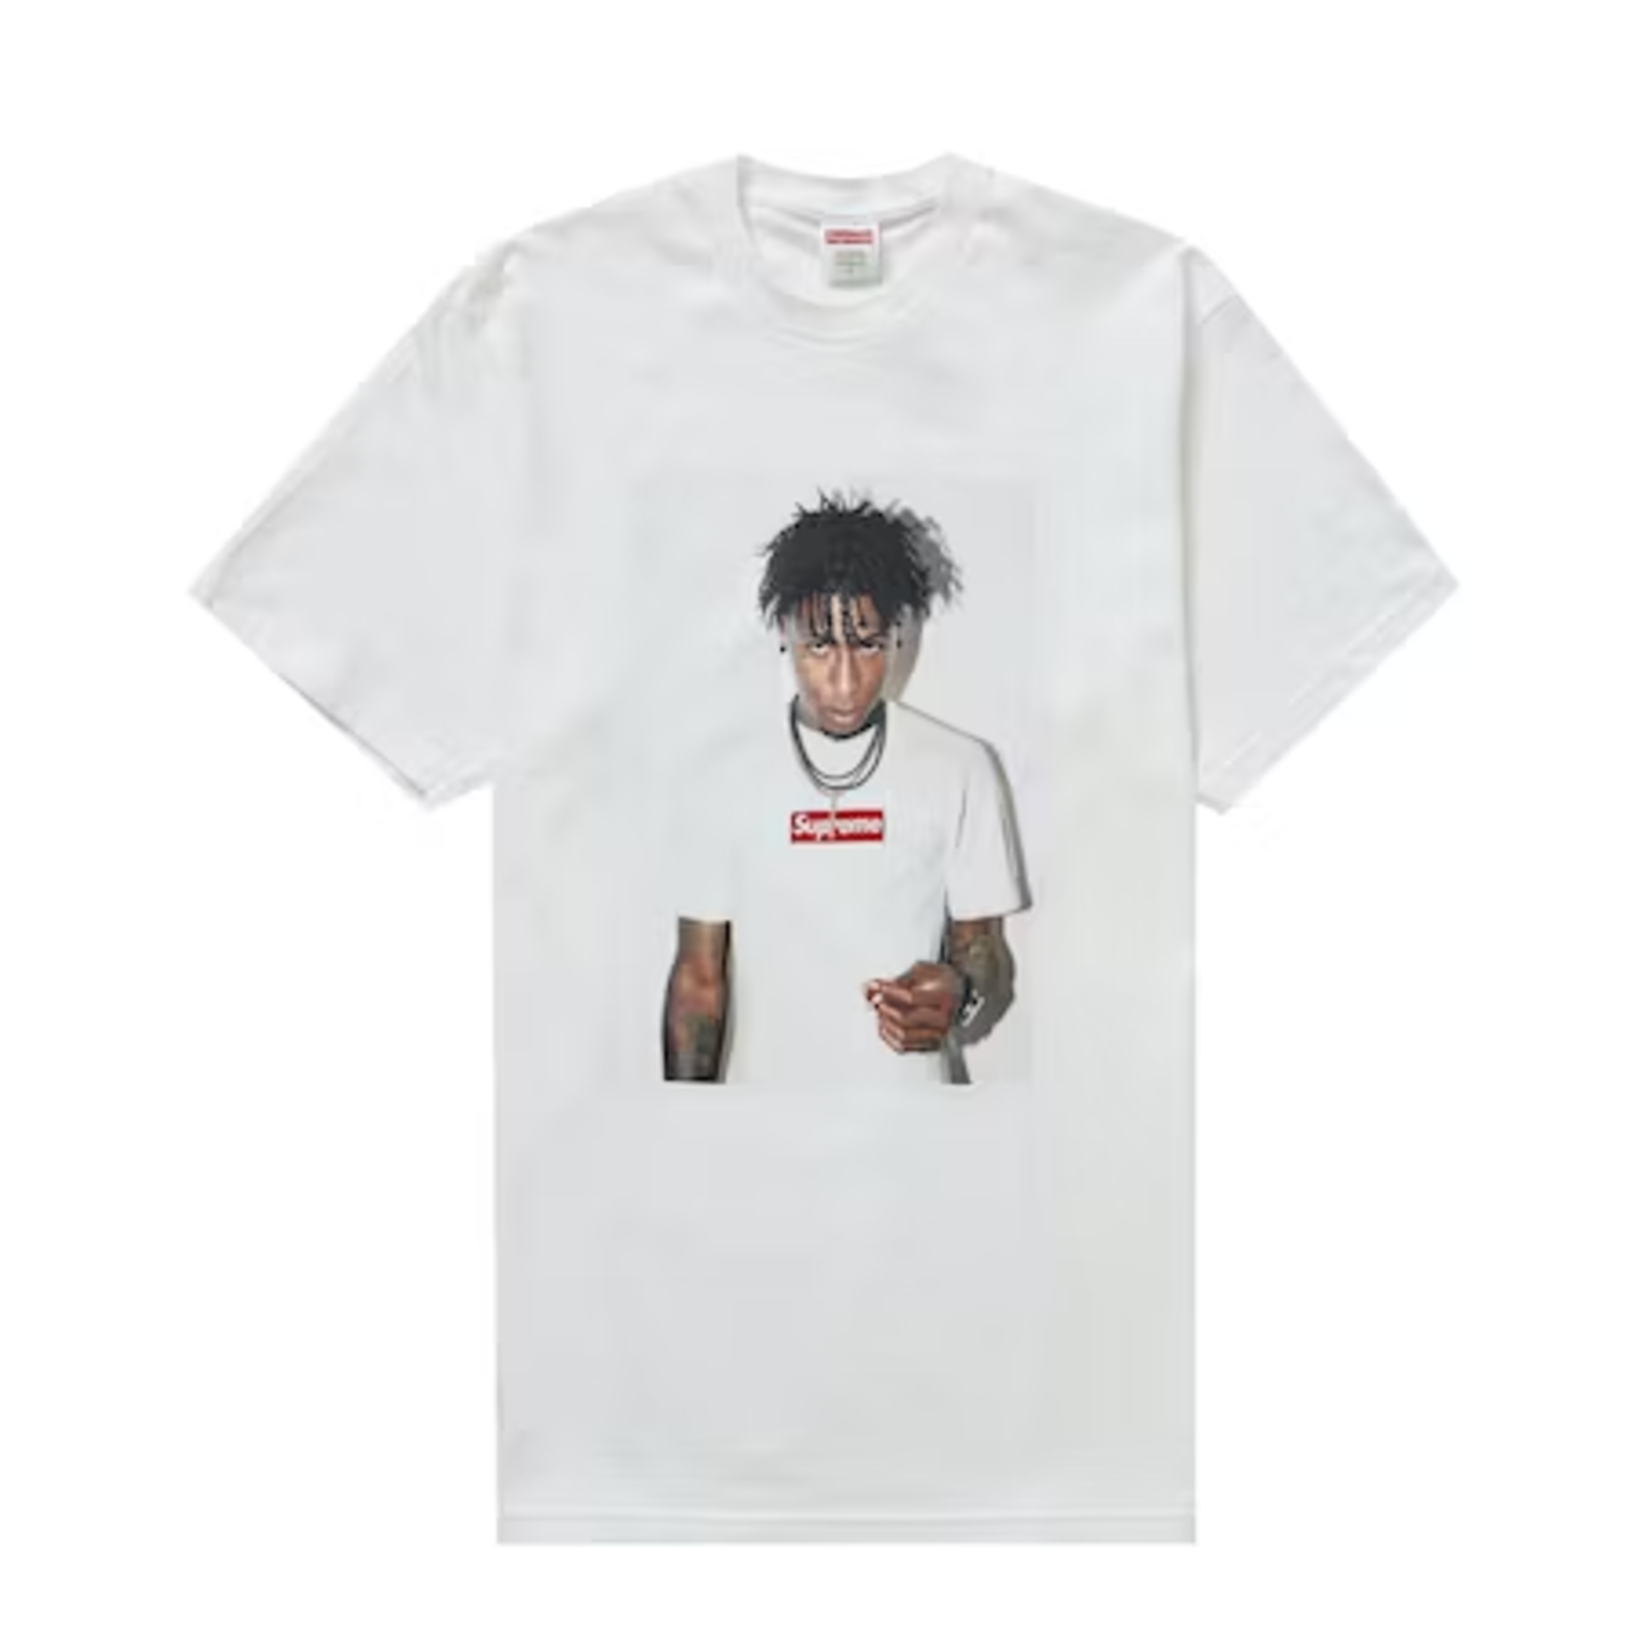 Supreme Supreme NBA Youngboy Tee White Size XLarge, DS BRAND NEW 